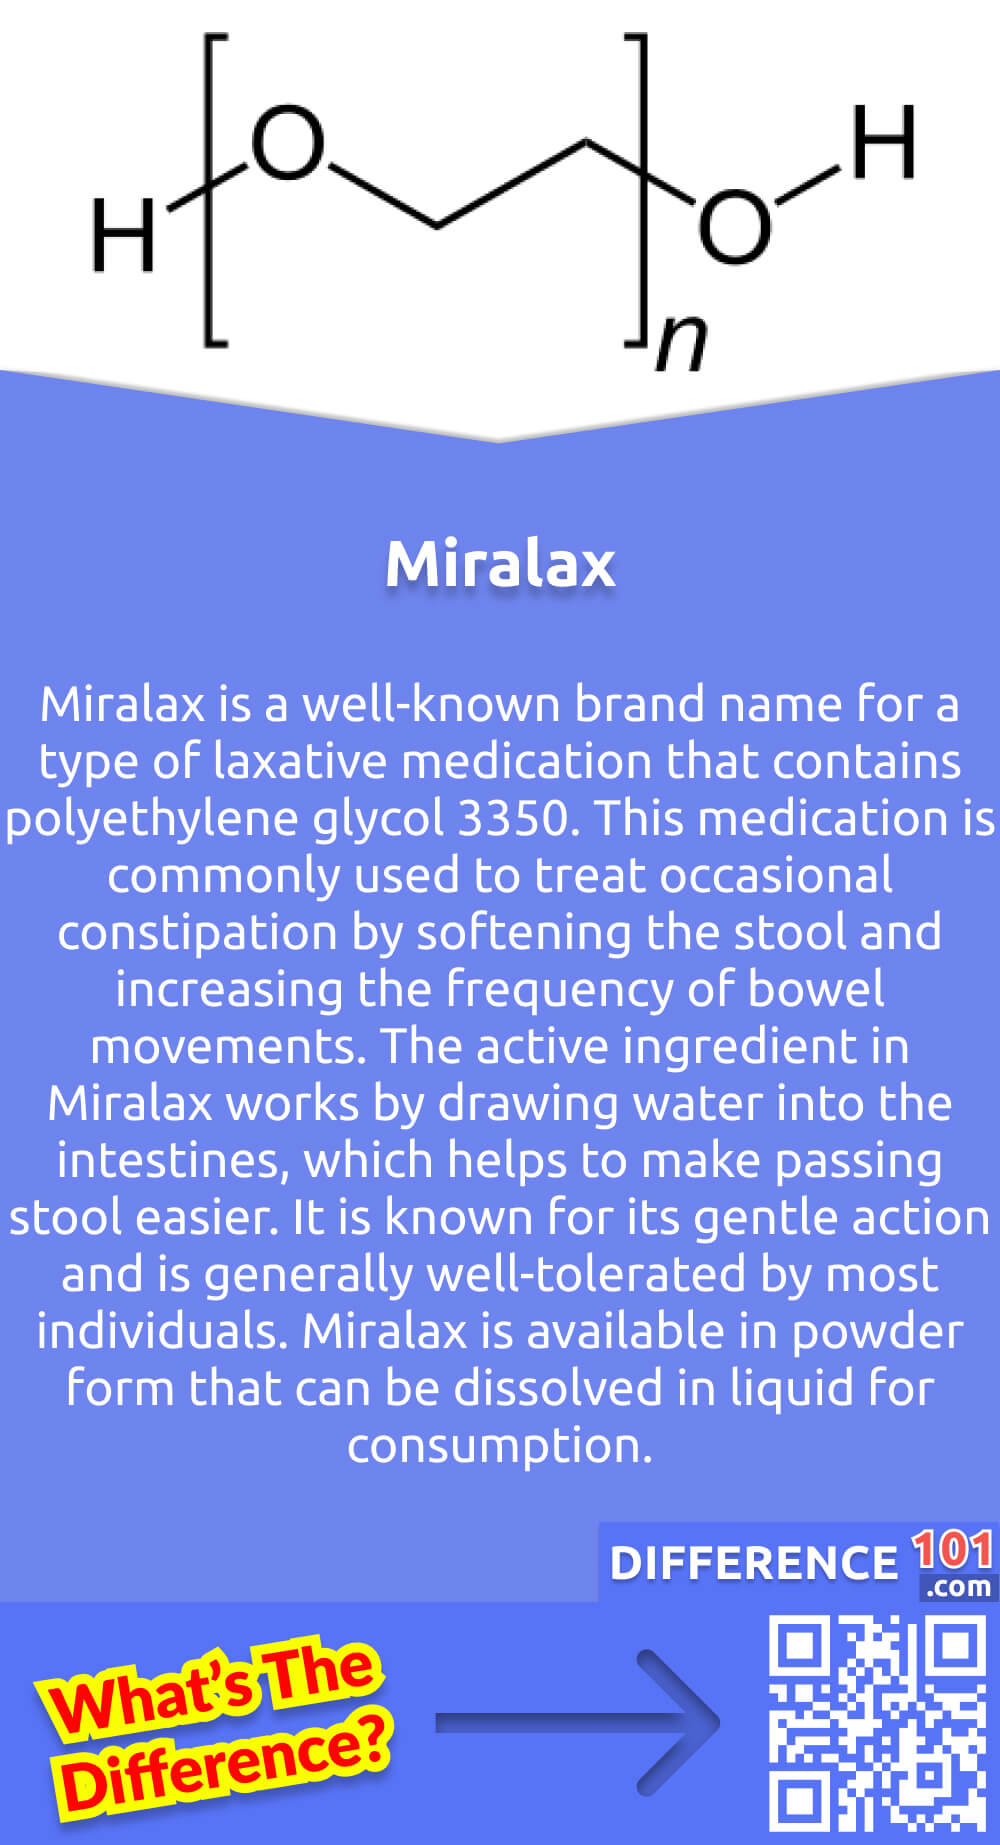 What Is Miralax? Miralax is a well-known brand name for a type of laxative medication that contains polyethylene glycol 3350. This medication is commonly used to treat occasional constipation by softening the stool and increasing the frequency of bowel movements. The active ingredient in Miralax works by drawing water into the intestines, which helps to make passing stool easier. It is known for its gentle action and is generally well-tolerated by most individuals. Miralax is available in powder form that can be dissolved in liquid for consumption. However, it is important to use this medication as directed by a healthcare provider or according to the instructions on the packaging to ensure its effectiveness and safety.